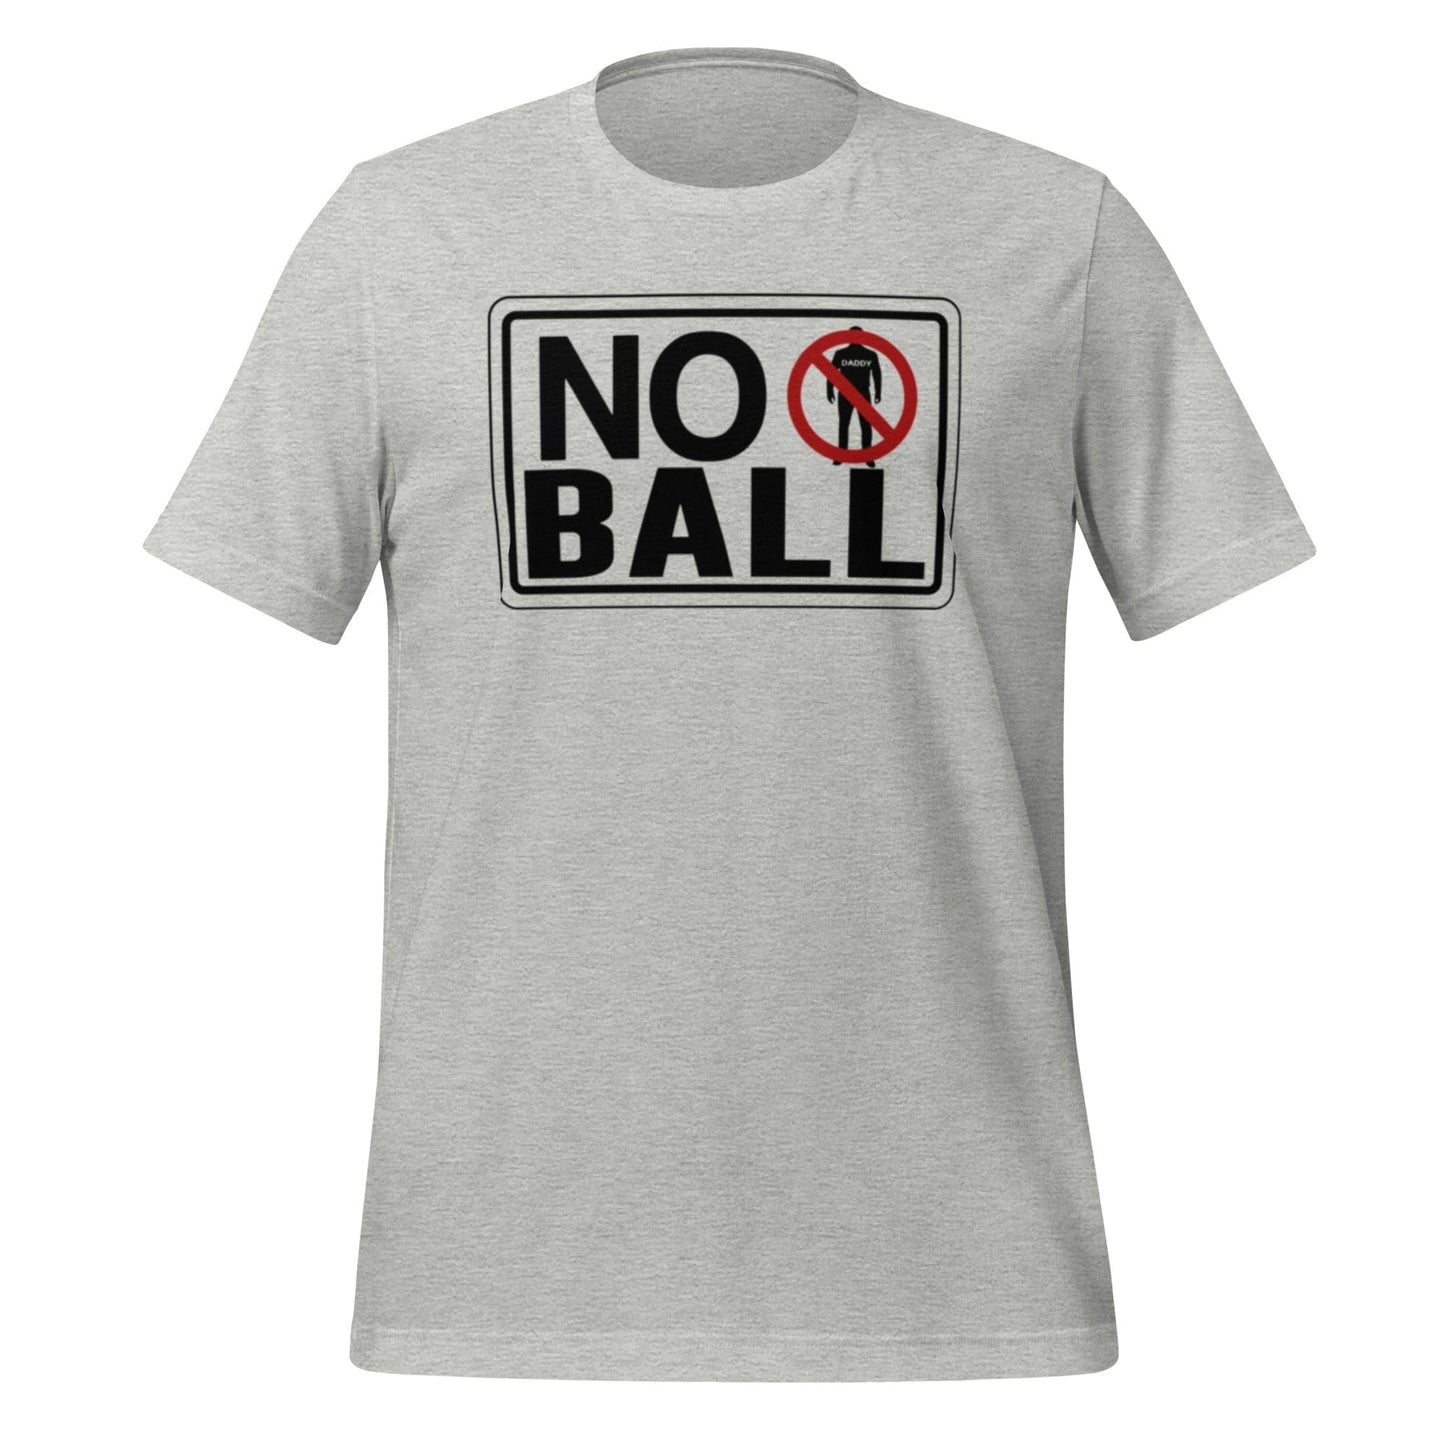 No Daddy Ball - Adult Tee